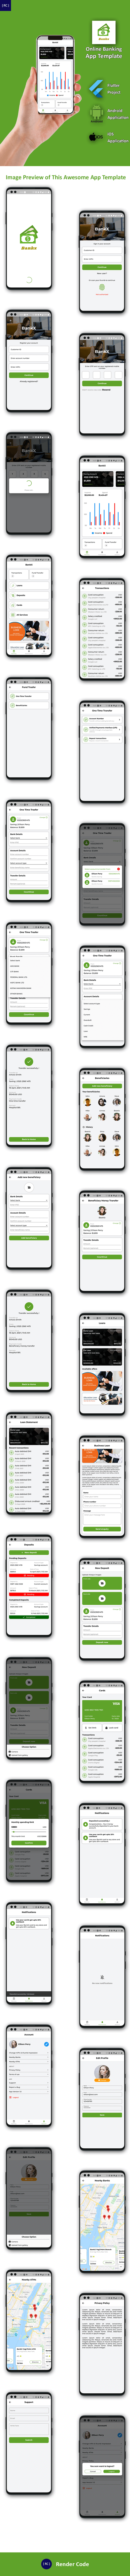 Online Banking Android App + Online Banking iOS App Template| Bank App| BankX | Flutter - 10